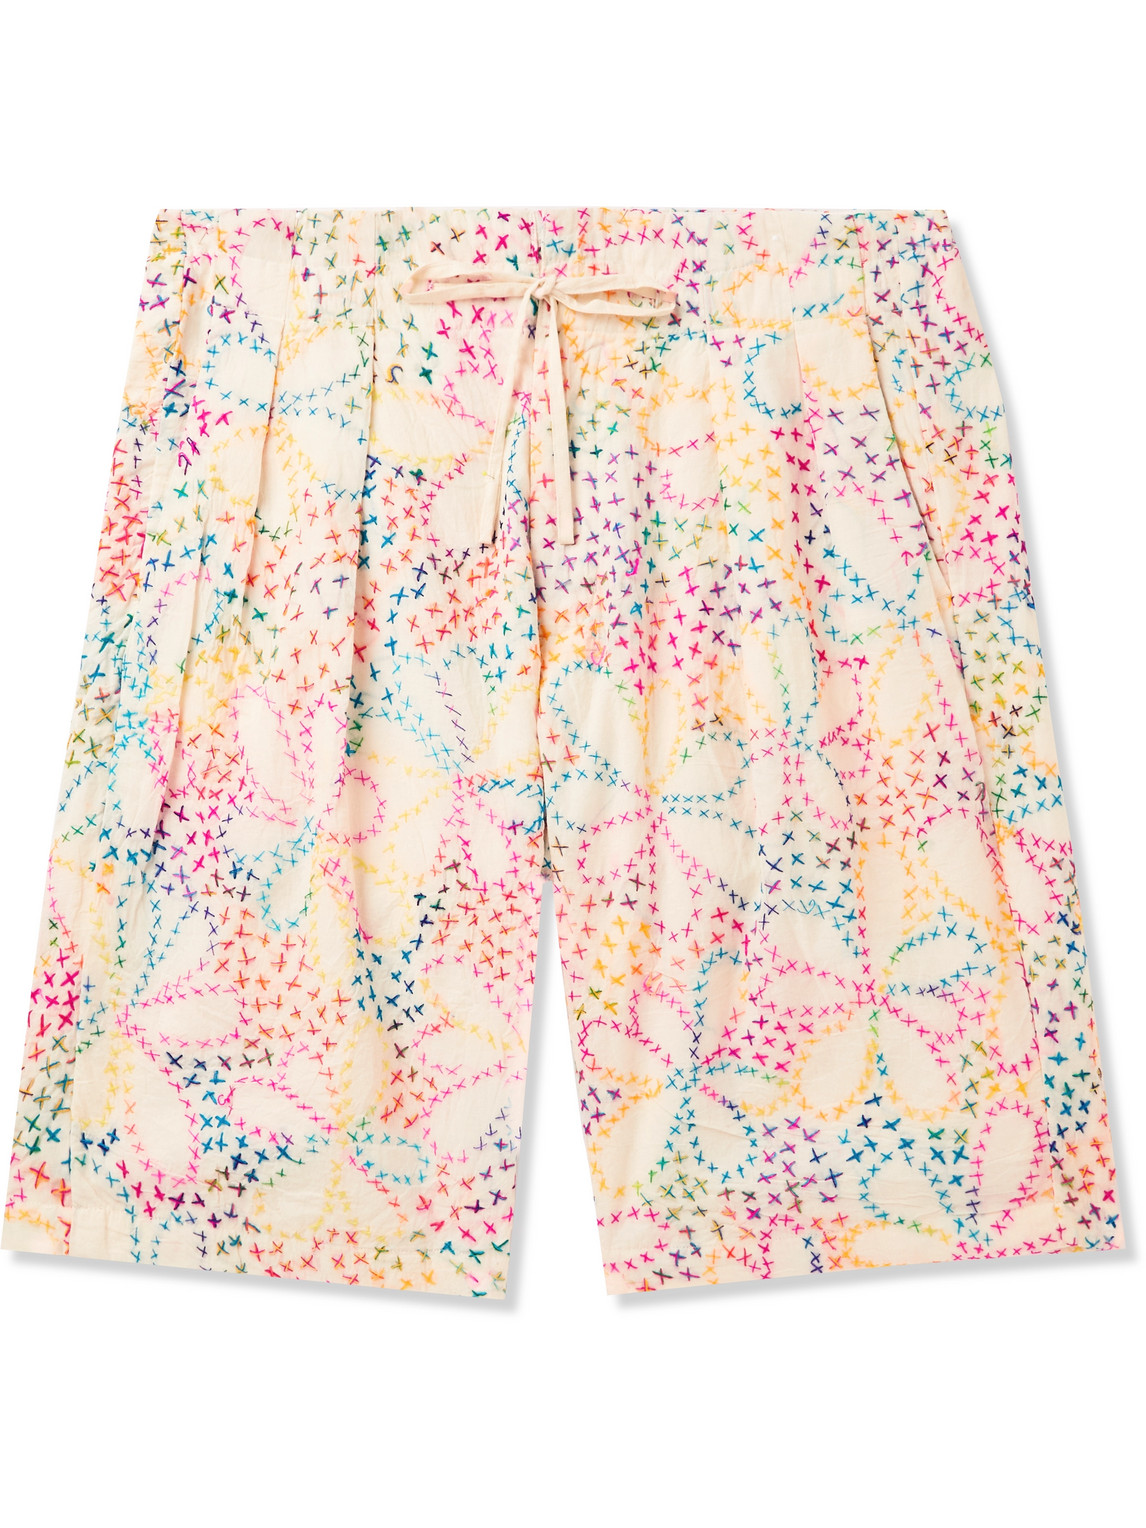 Straight-Leg Embroidered Cotton Shorts